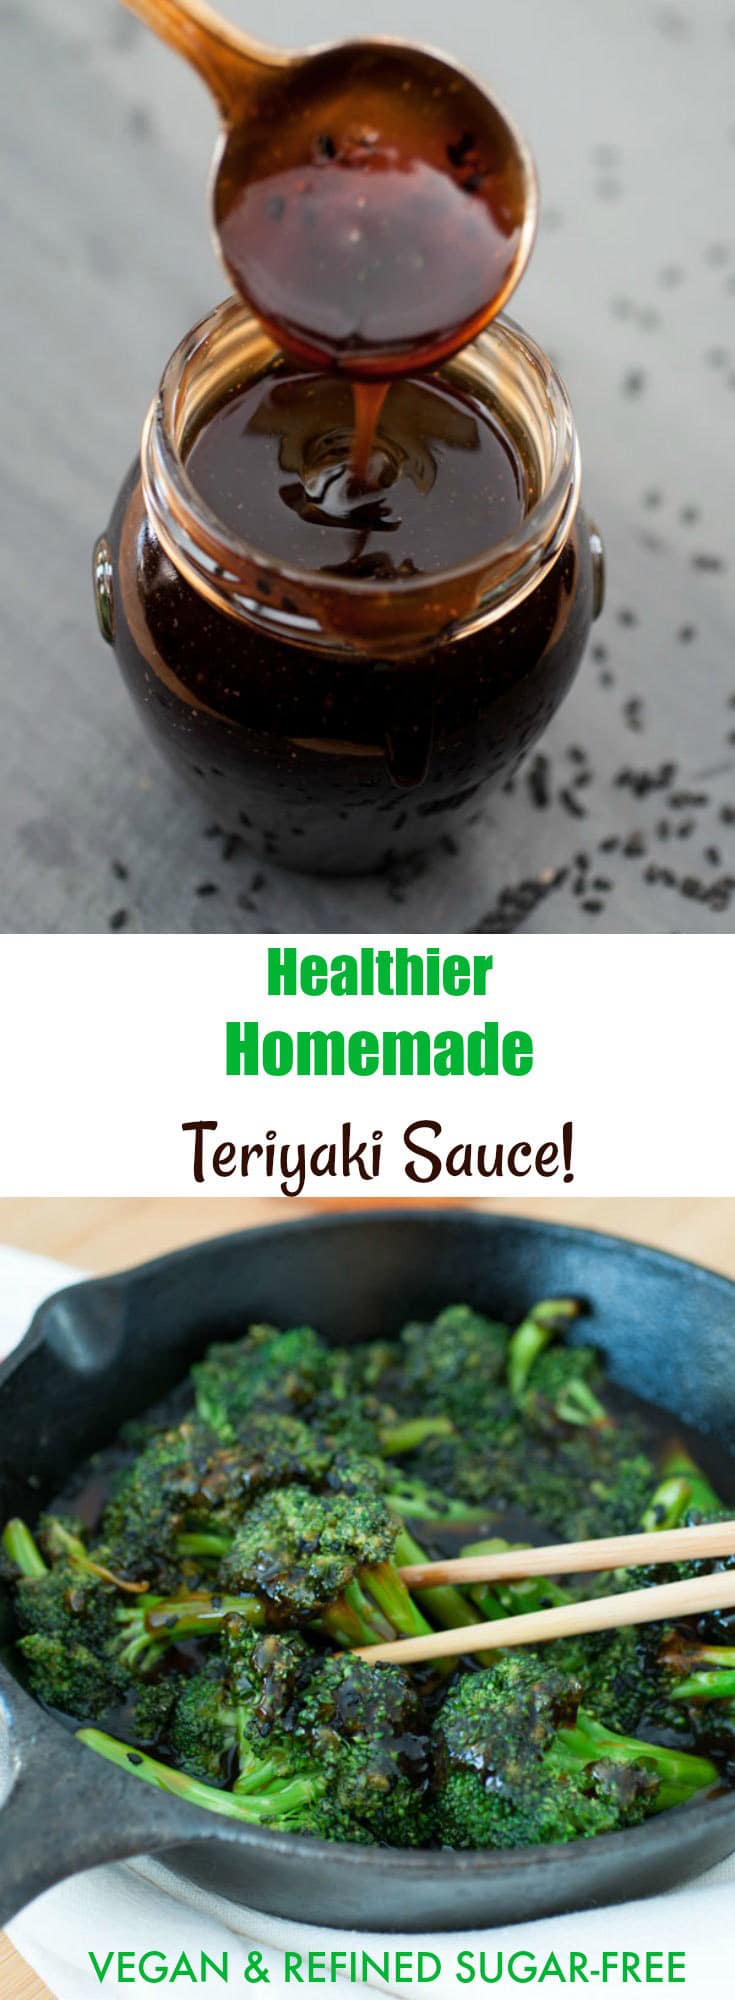 Healthy Homemade Vegan Teriyaki Sauce! Only 6 ingredients and 10 minutes to make! Refined sugar-free.